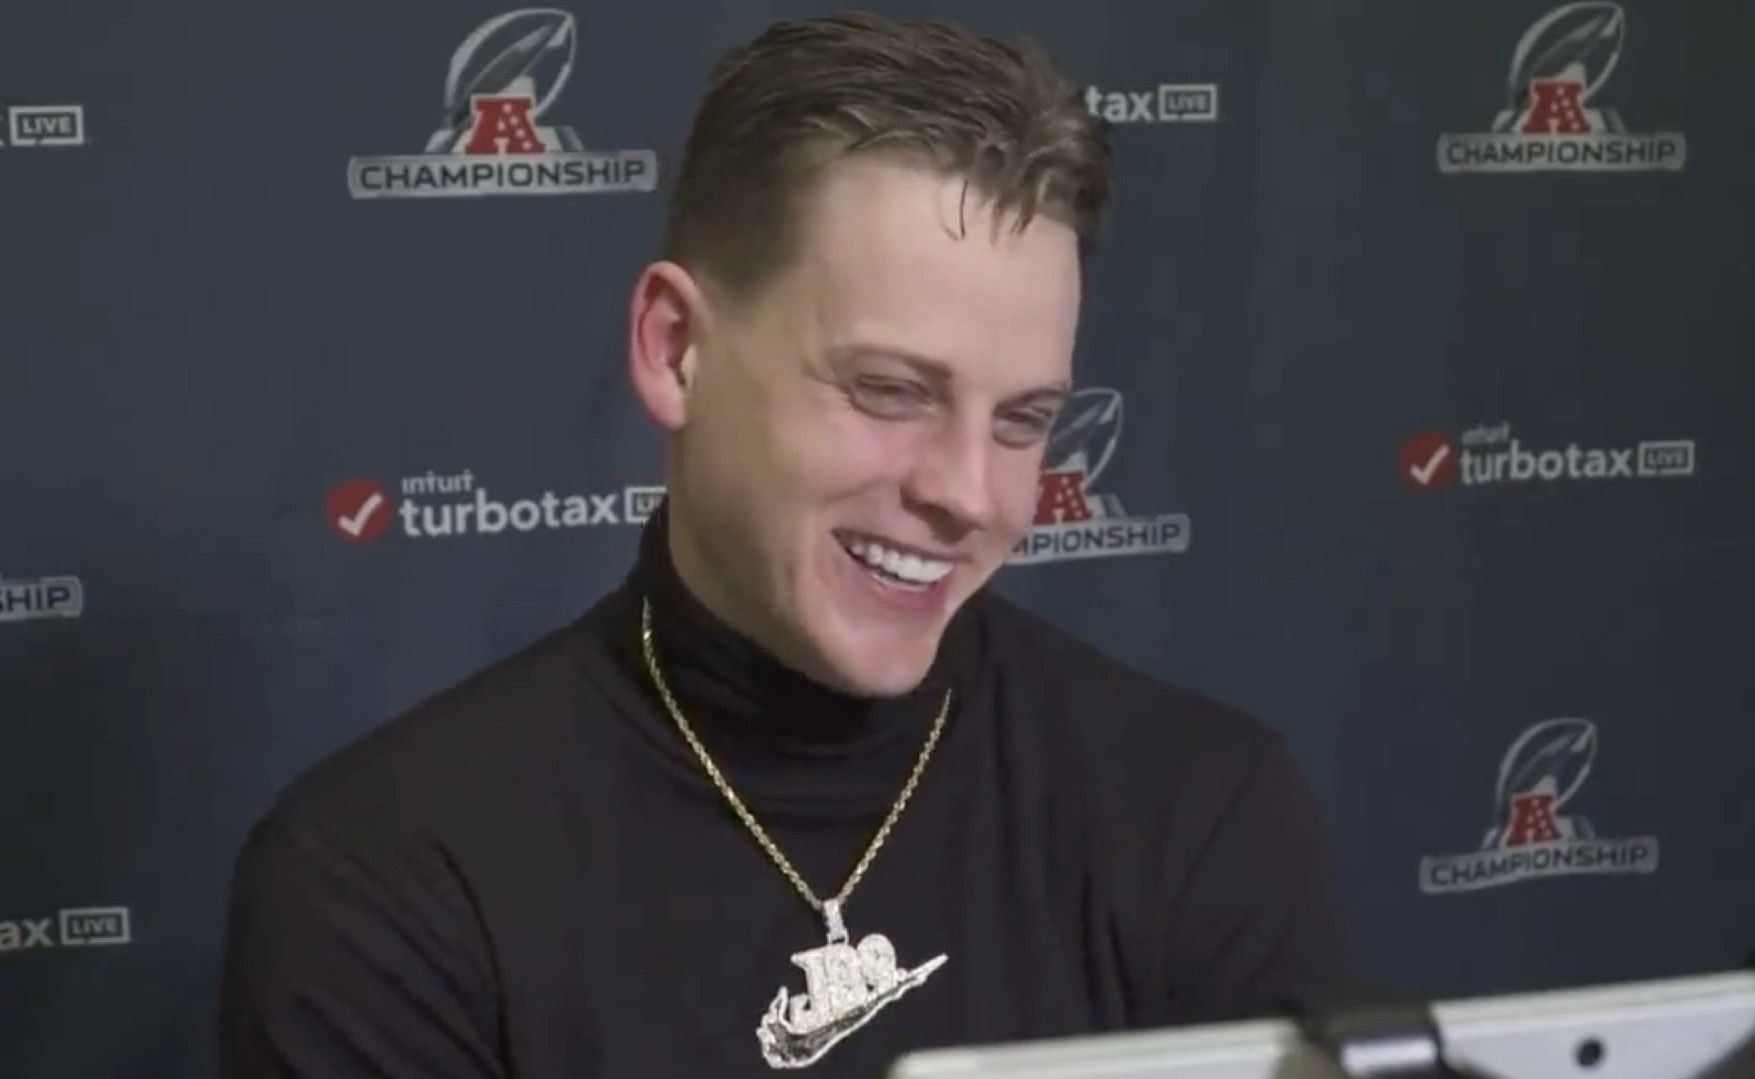 Joe Burrow was asked about his diamond necklace. Credit: @MySportsUpdate